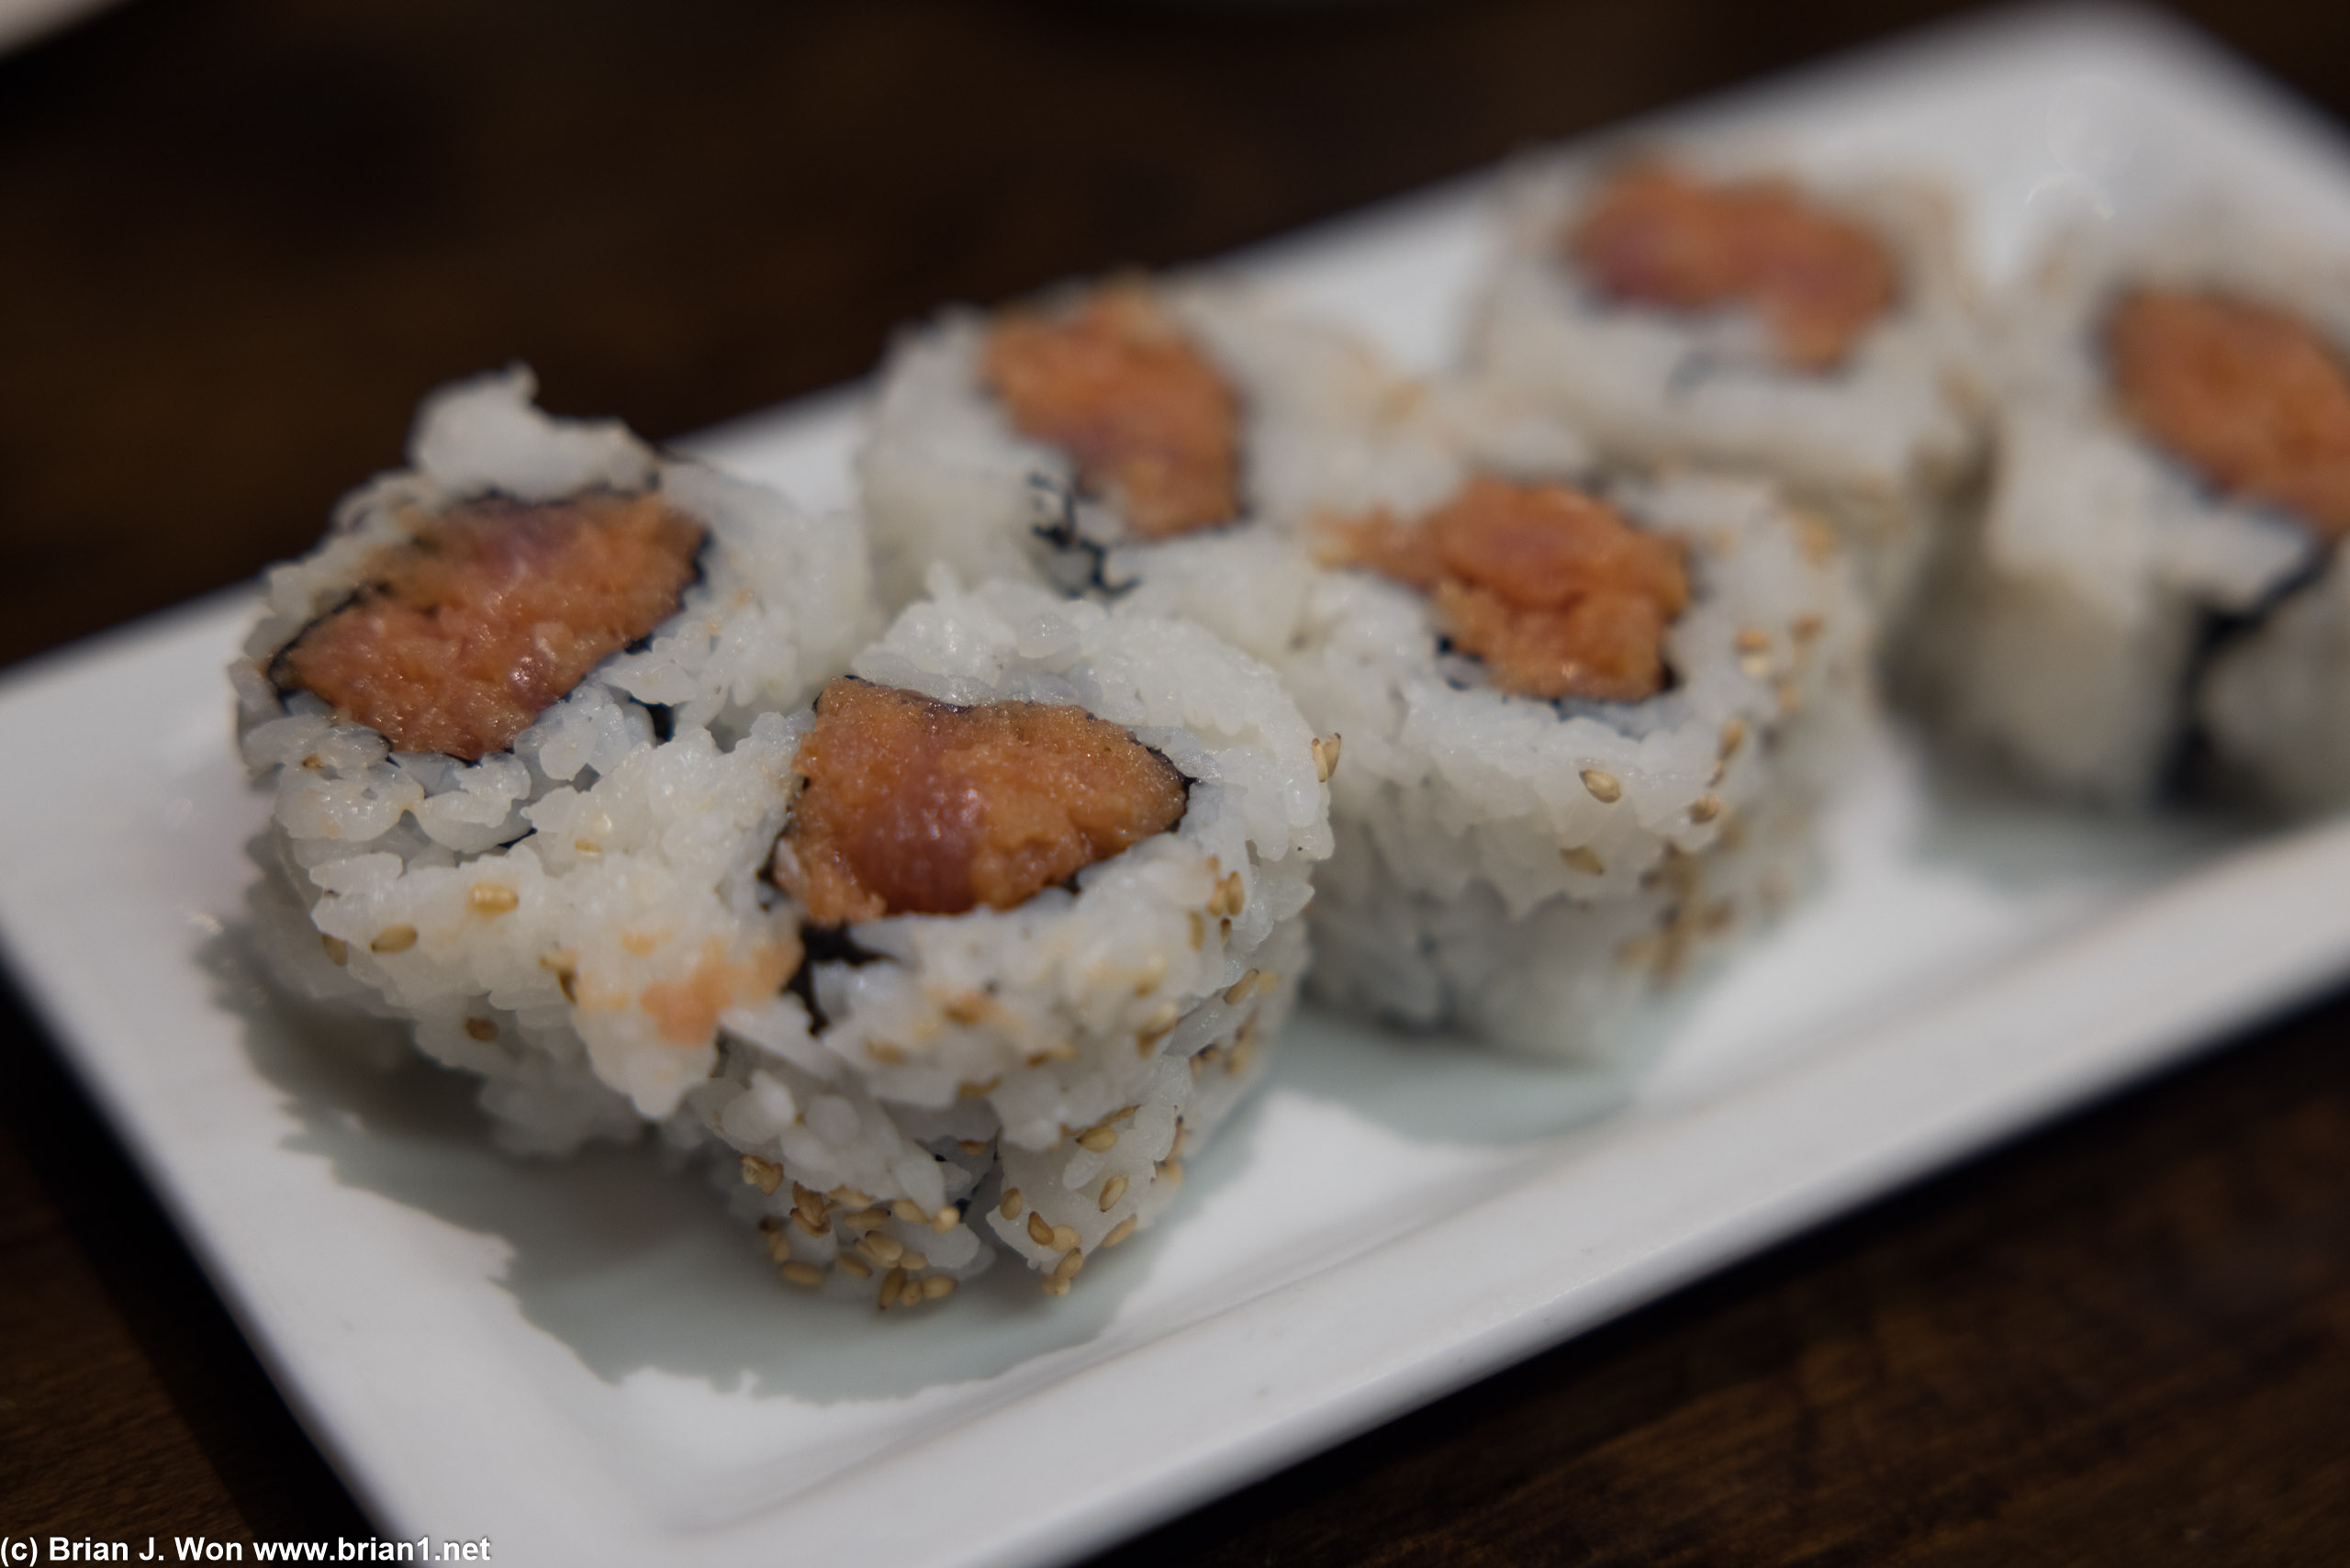 Spicy tuna roll. Serviceable.